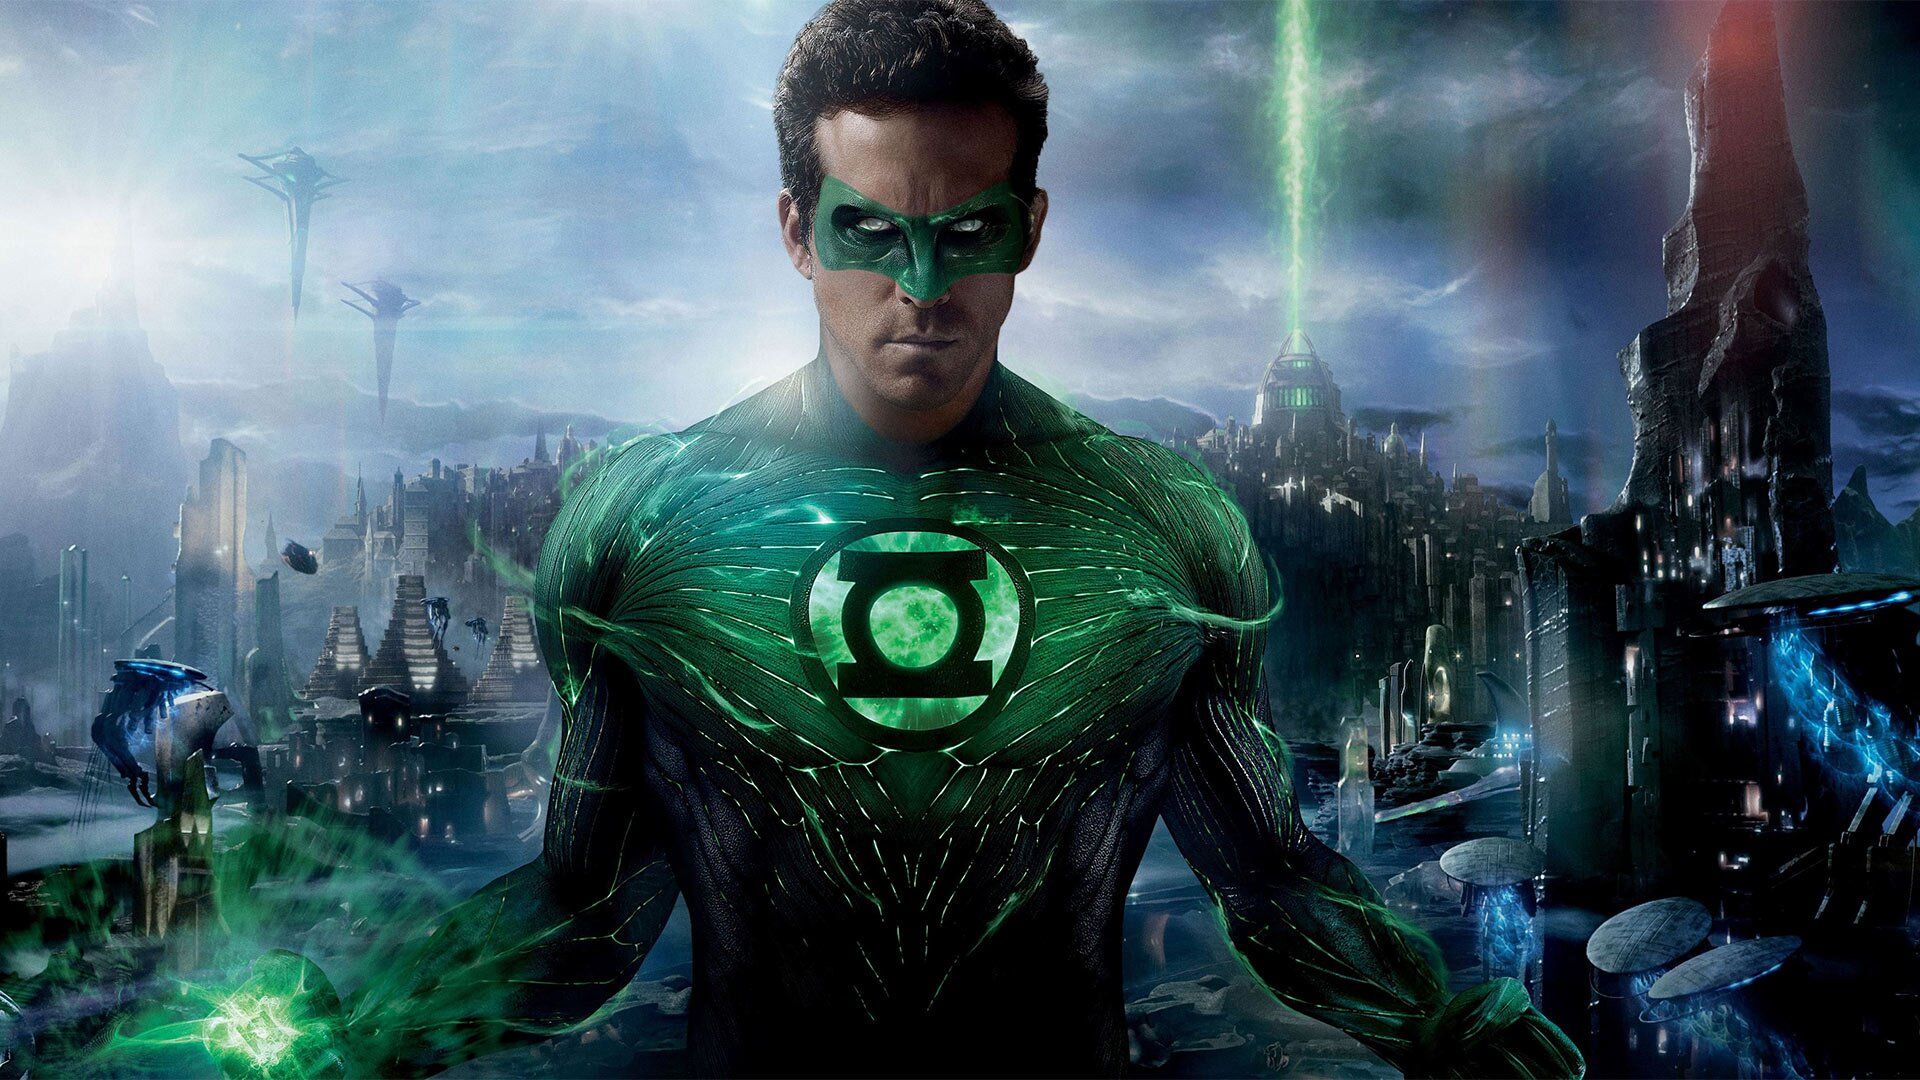 Ryan Reynolds Watches Green Lantern For First Time And Live Tweets Experience